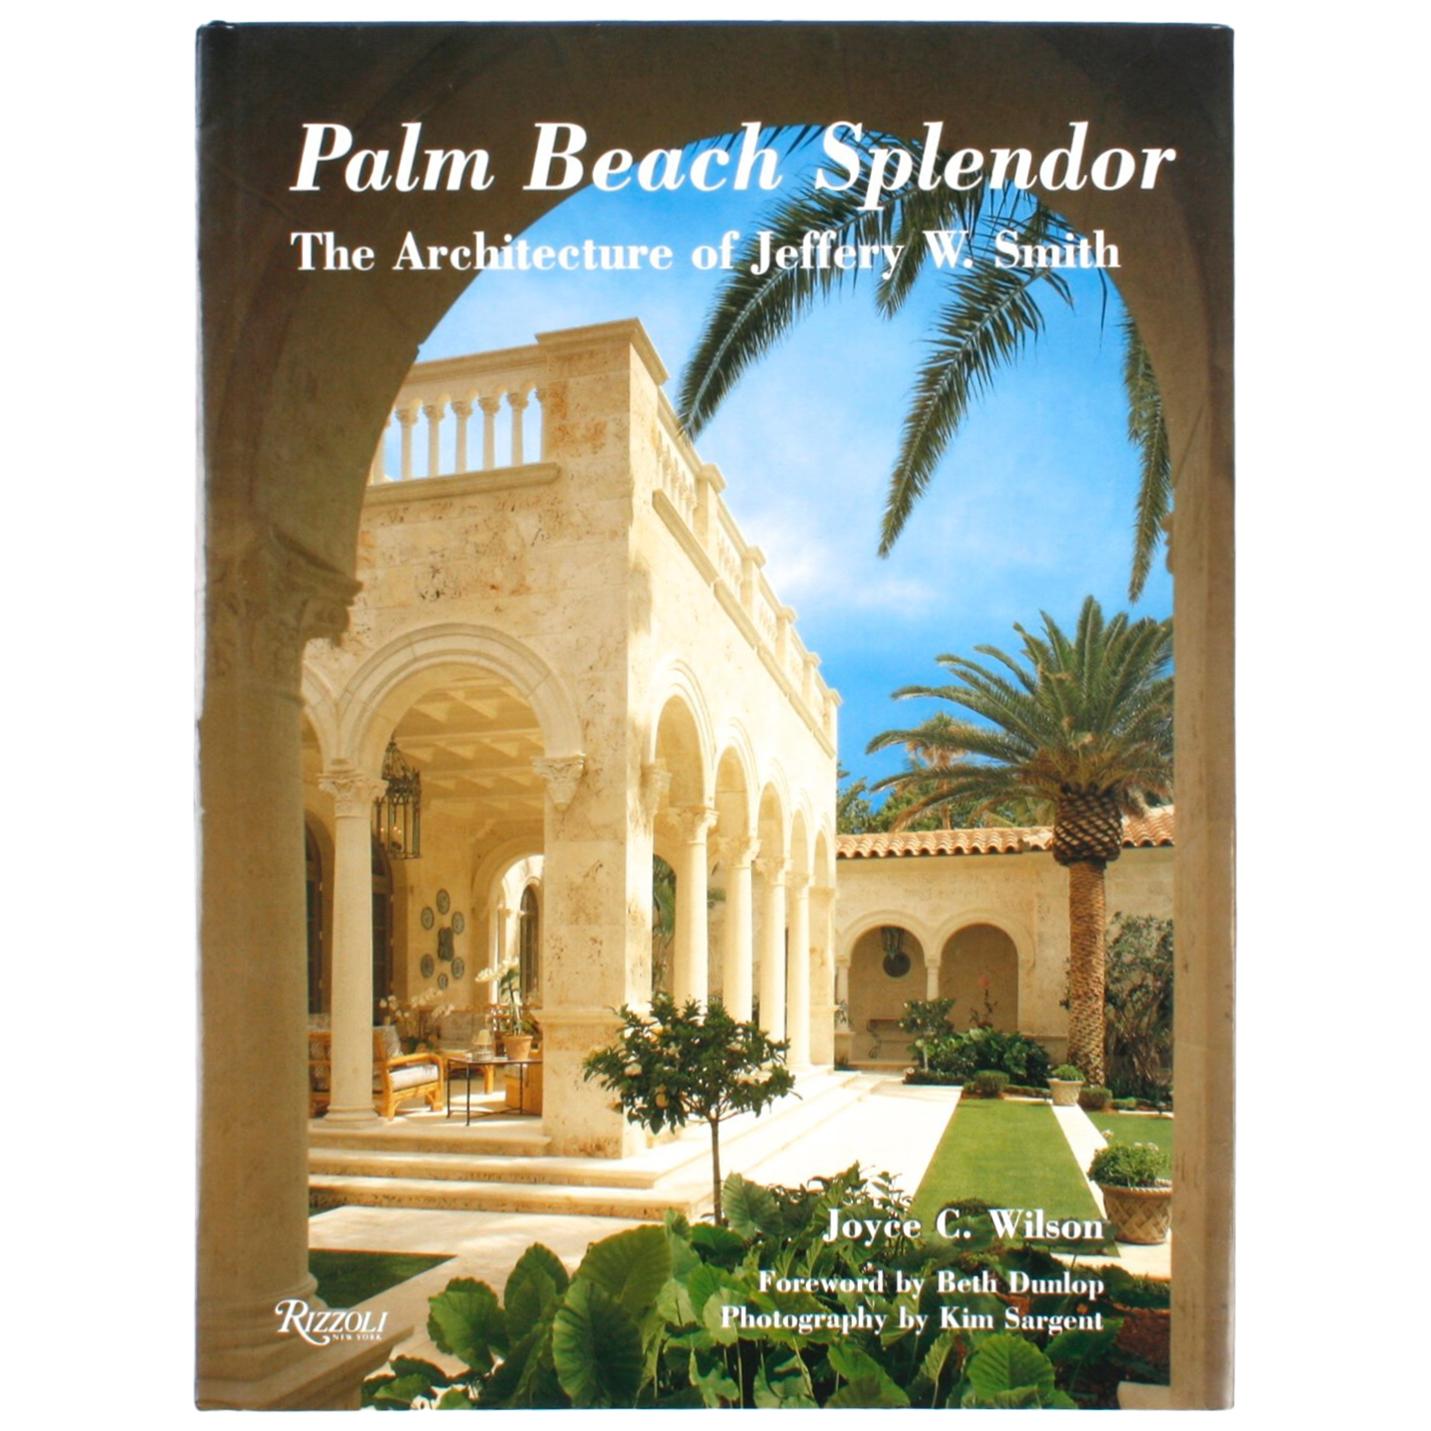 “Palm Beach Splendor, The Architecture of Jeffrey W. Smith” Signed First Edition